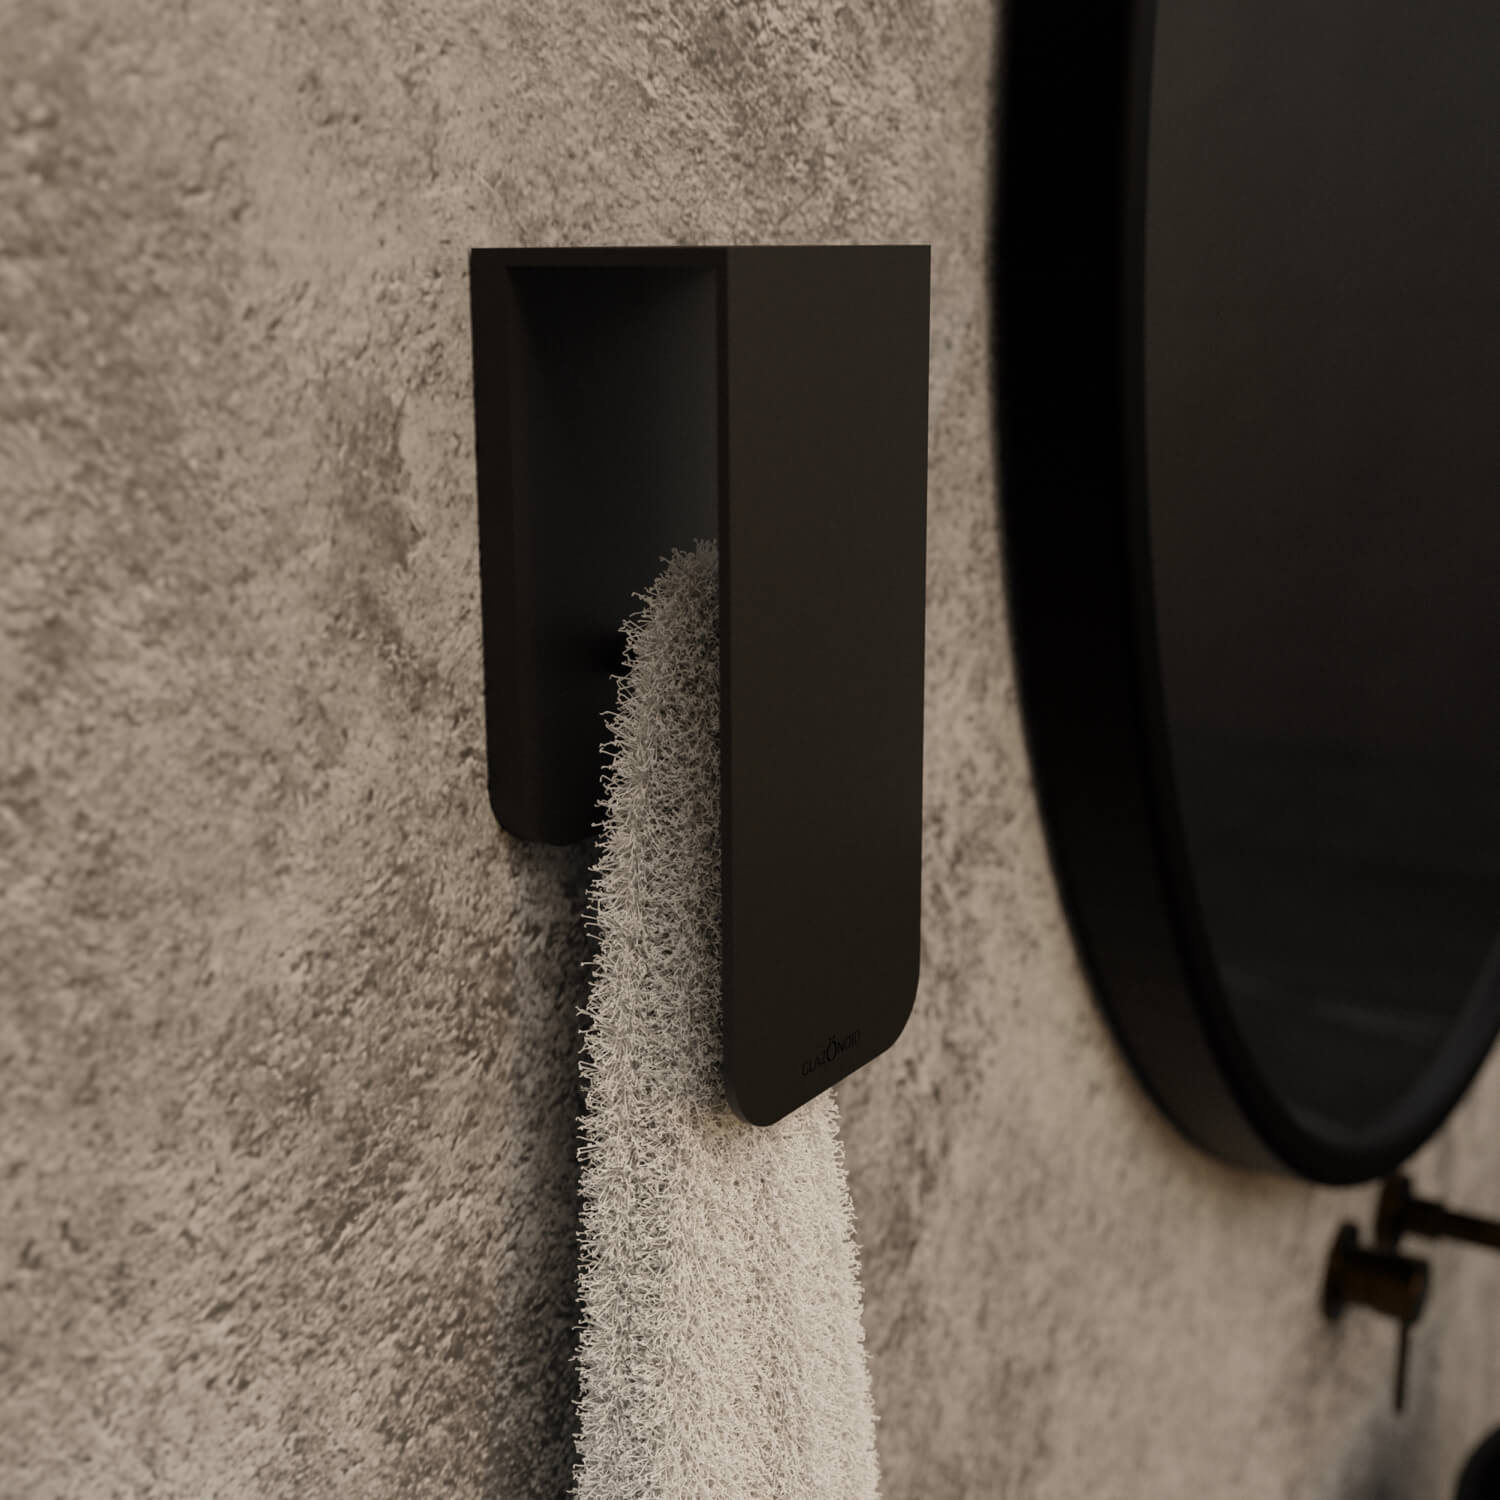 A white towel hanging on a matt black towel rack known as Aire mounted on a beige bathroom wall next to a round mirror with a black frame.